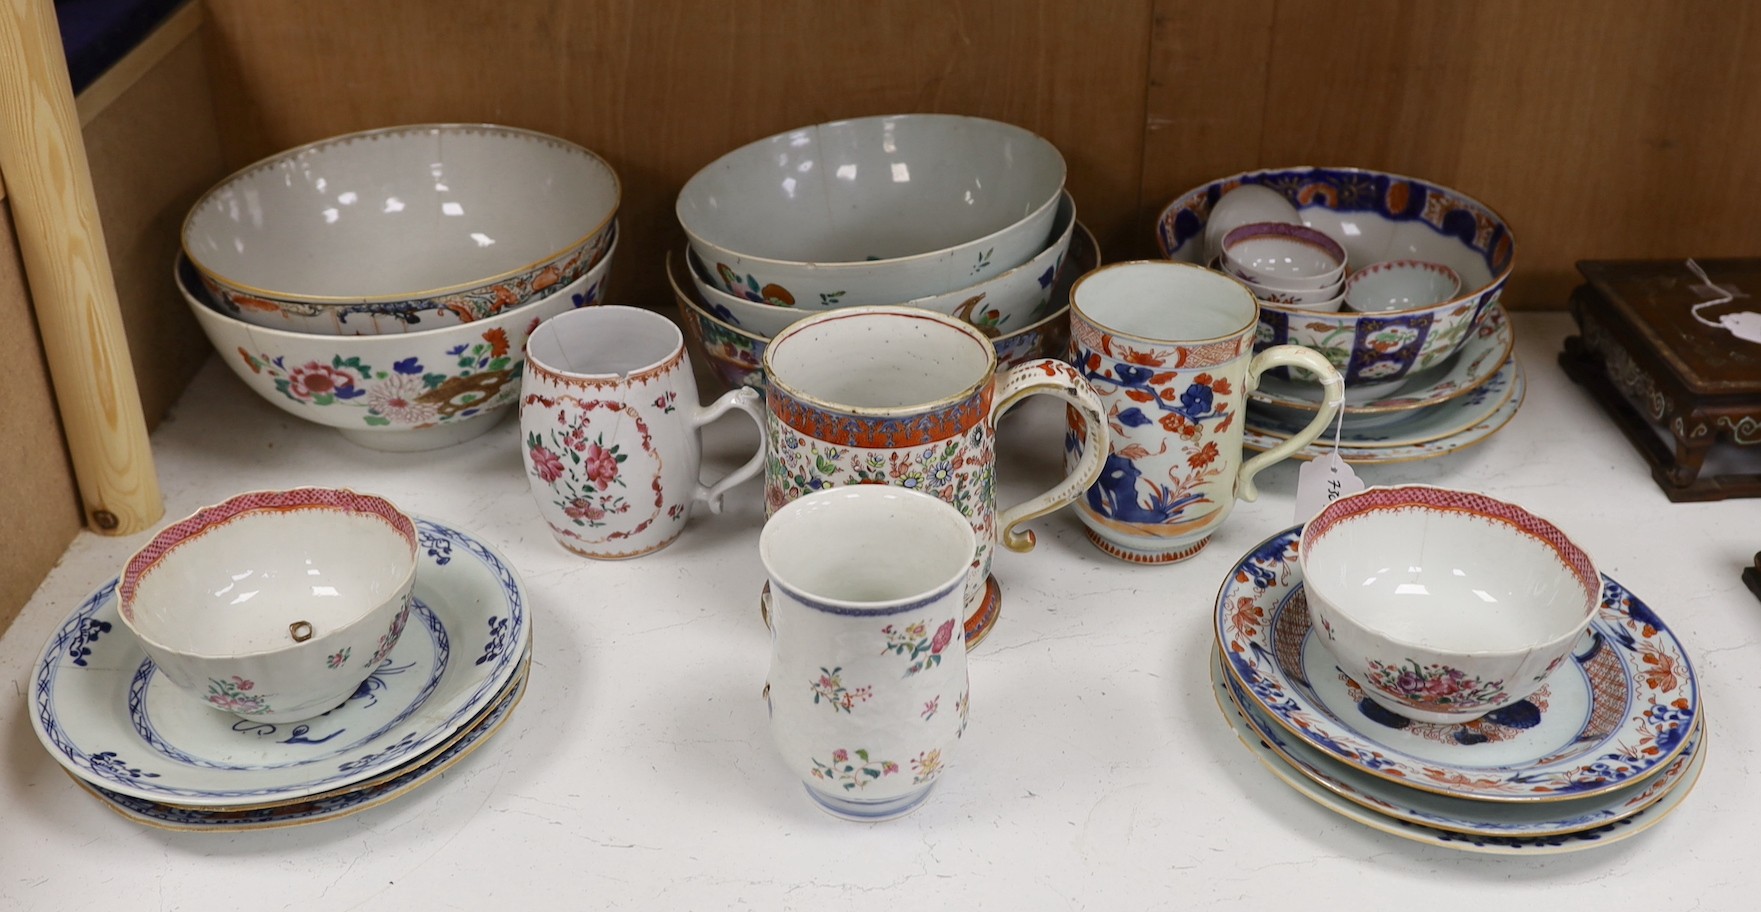 A large selection of 18th century Chinese export porcelain bowls, plates and mugs a/f                                                                                                                                       